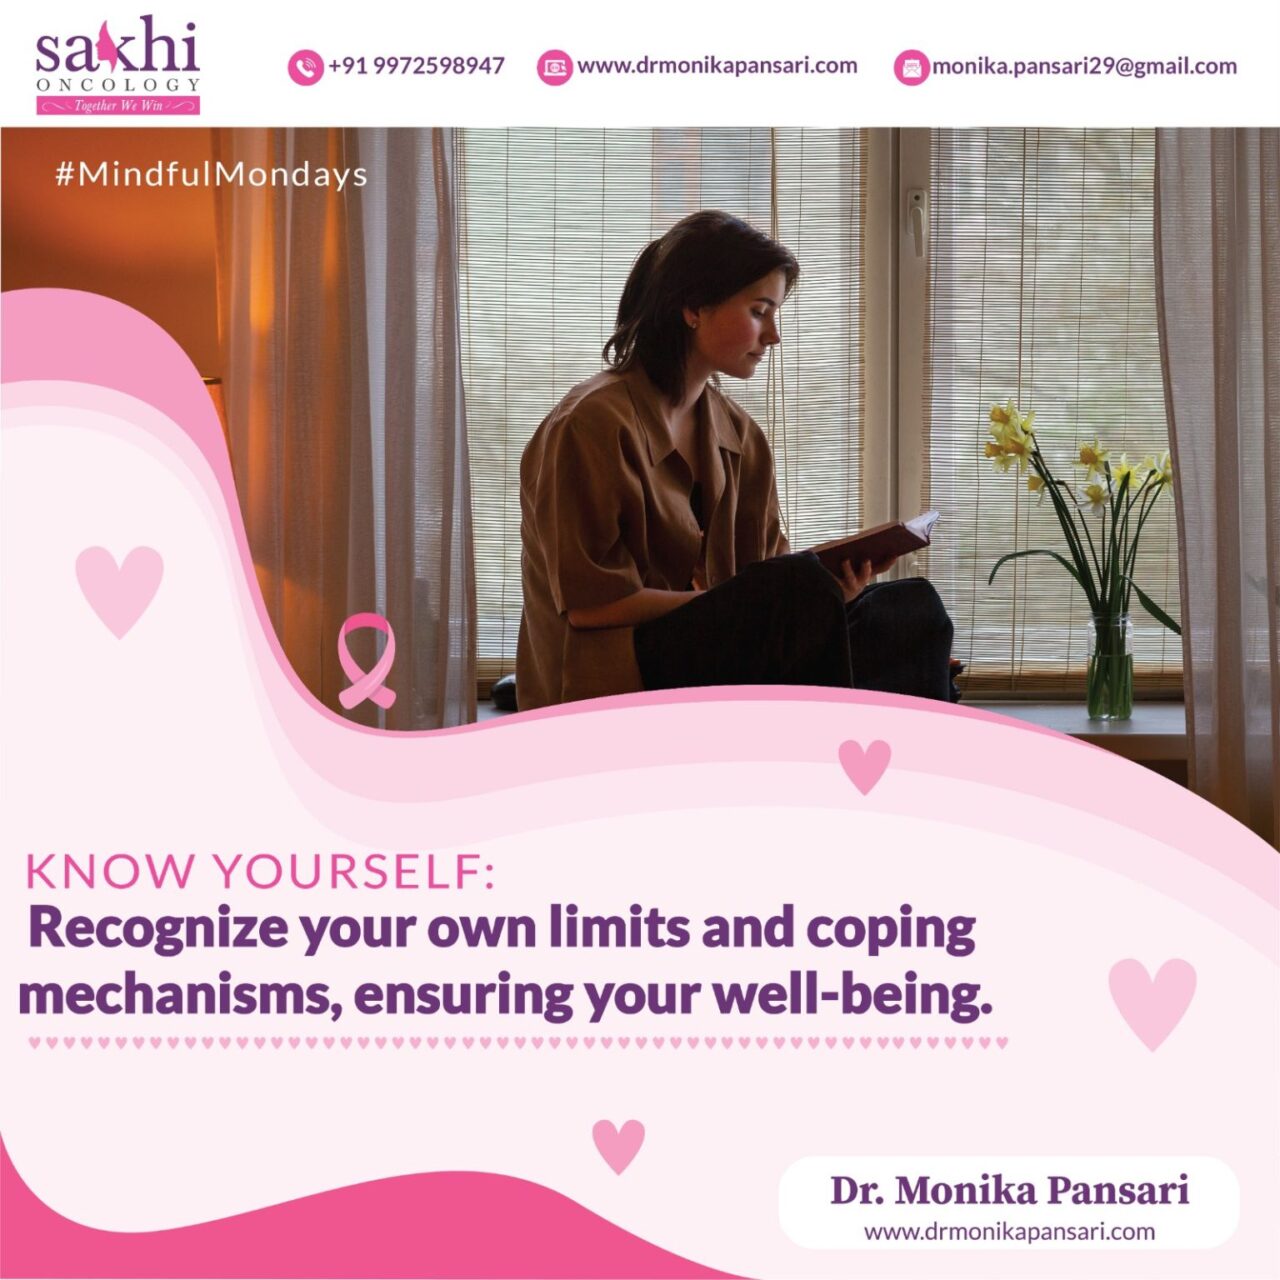 Monika Pansari: Recognizing your own limits and understanding your coping mechanisms is essential for maintaining well-being and preventing burnout